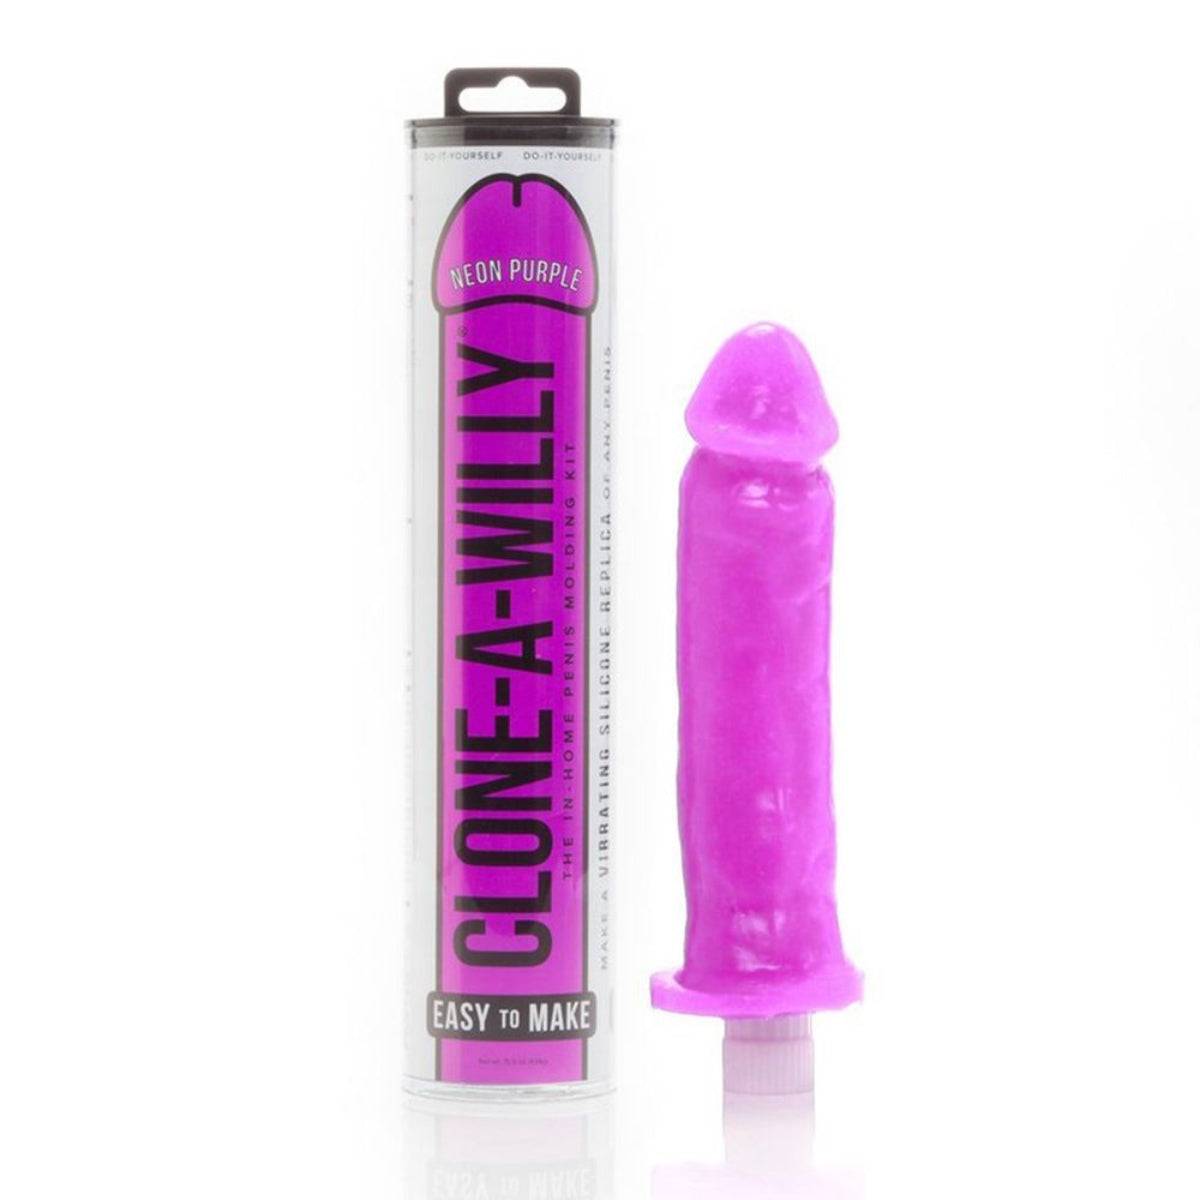 Clone A Willy Penis Moulding Kit Neon Purple - Simply Pleasure